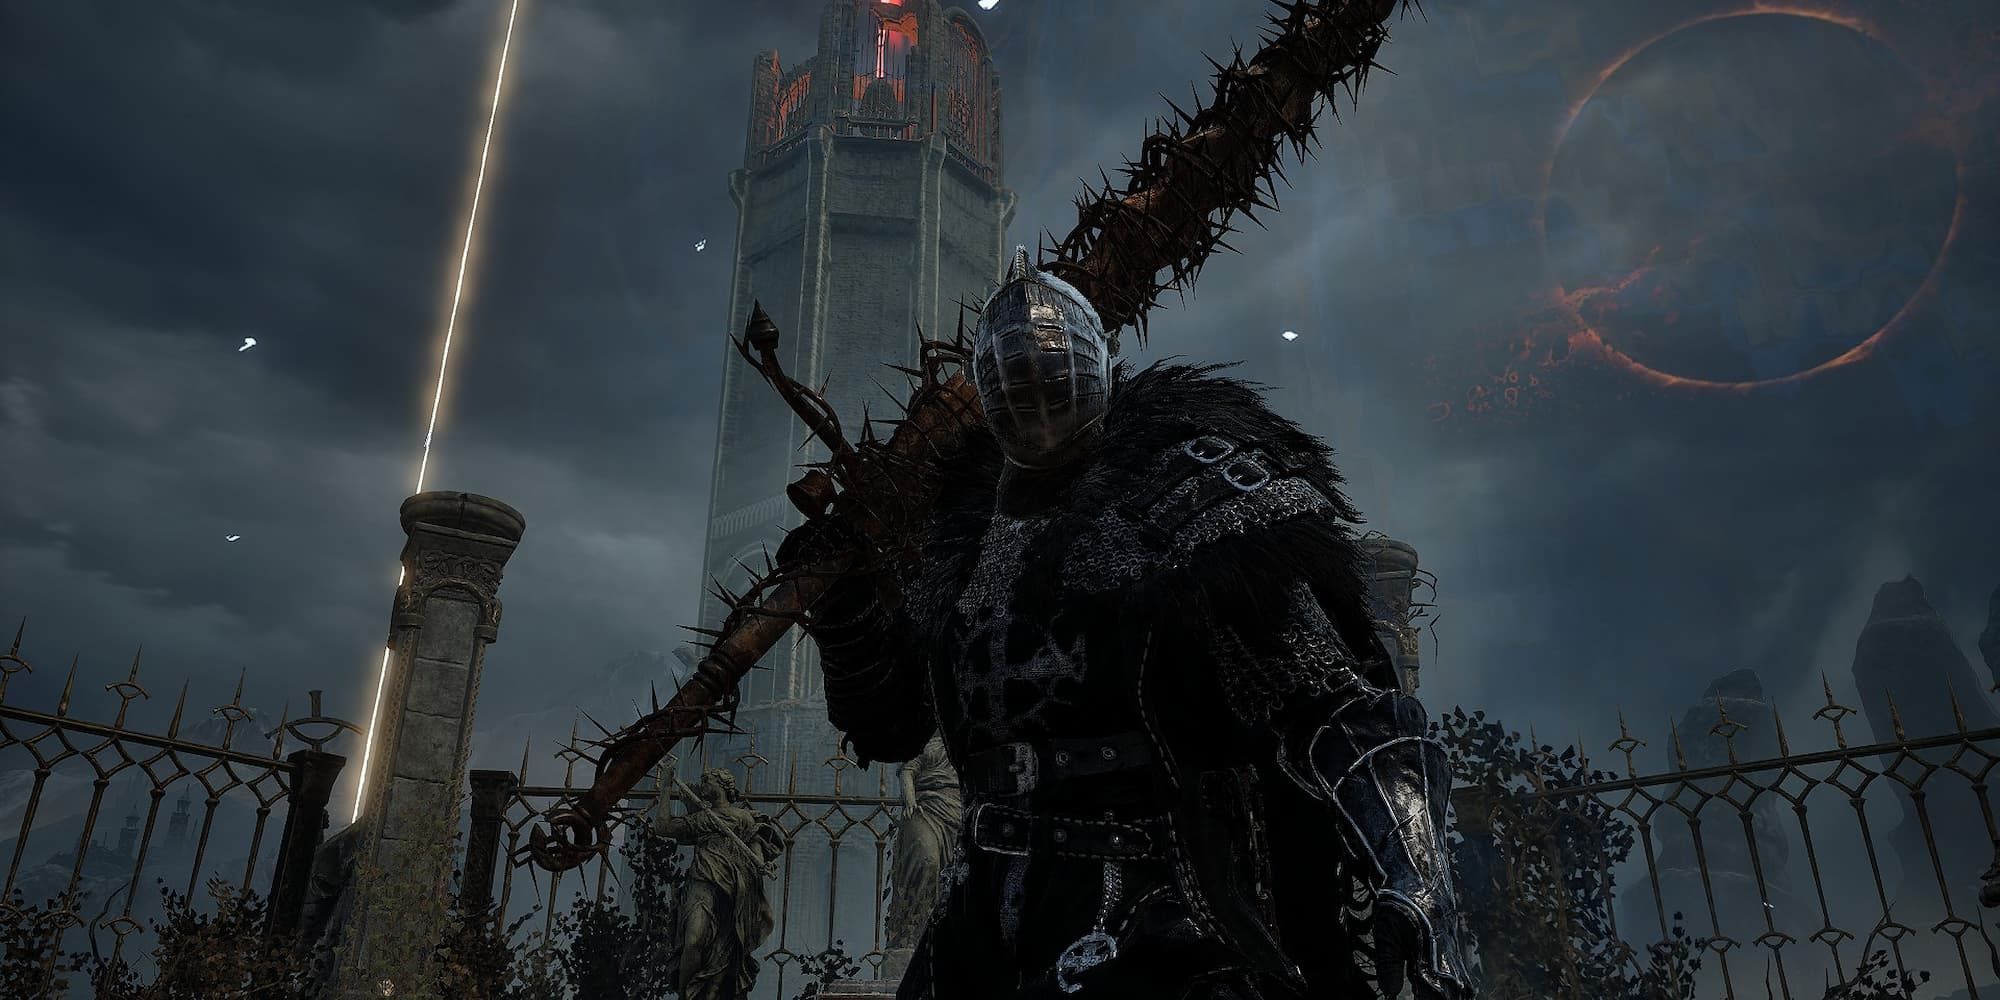 Holding Bloody Glory in Lords of the Fallen